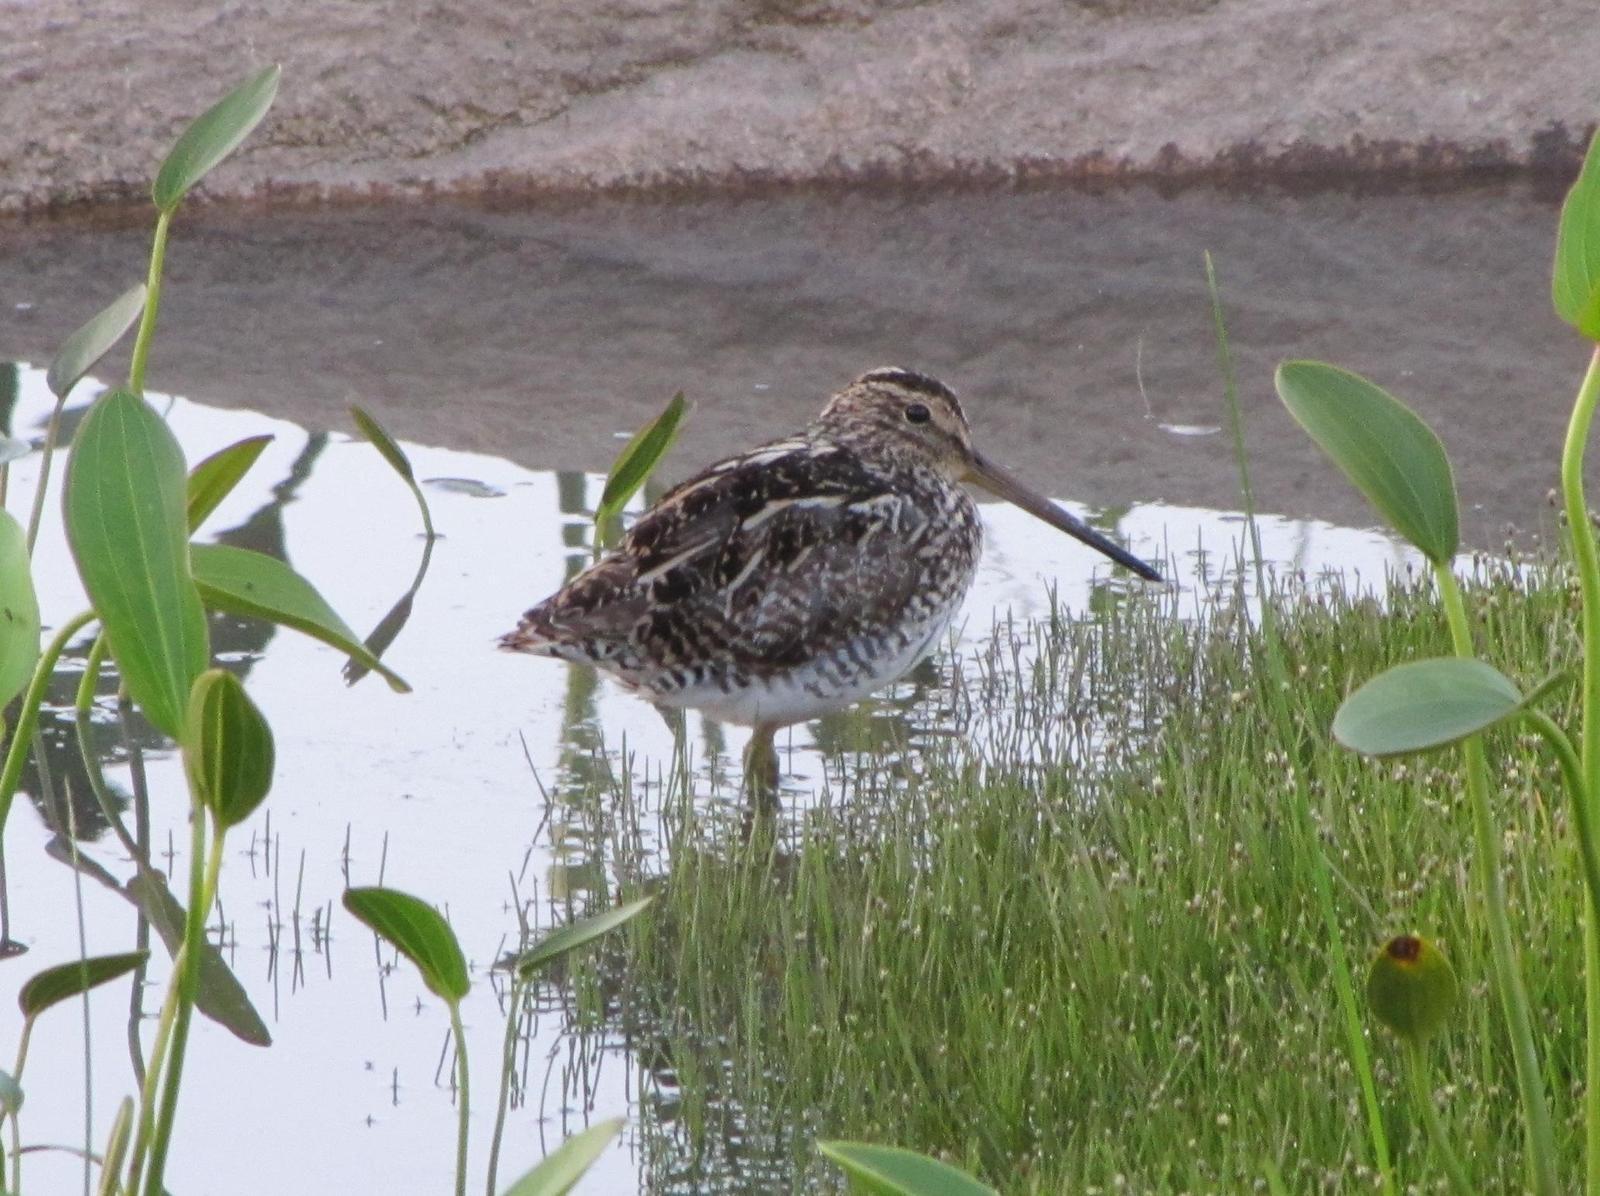 South American Snipe Photo by Jeff Harding